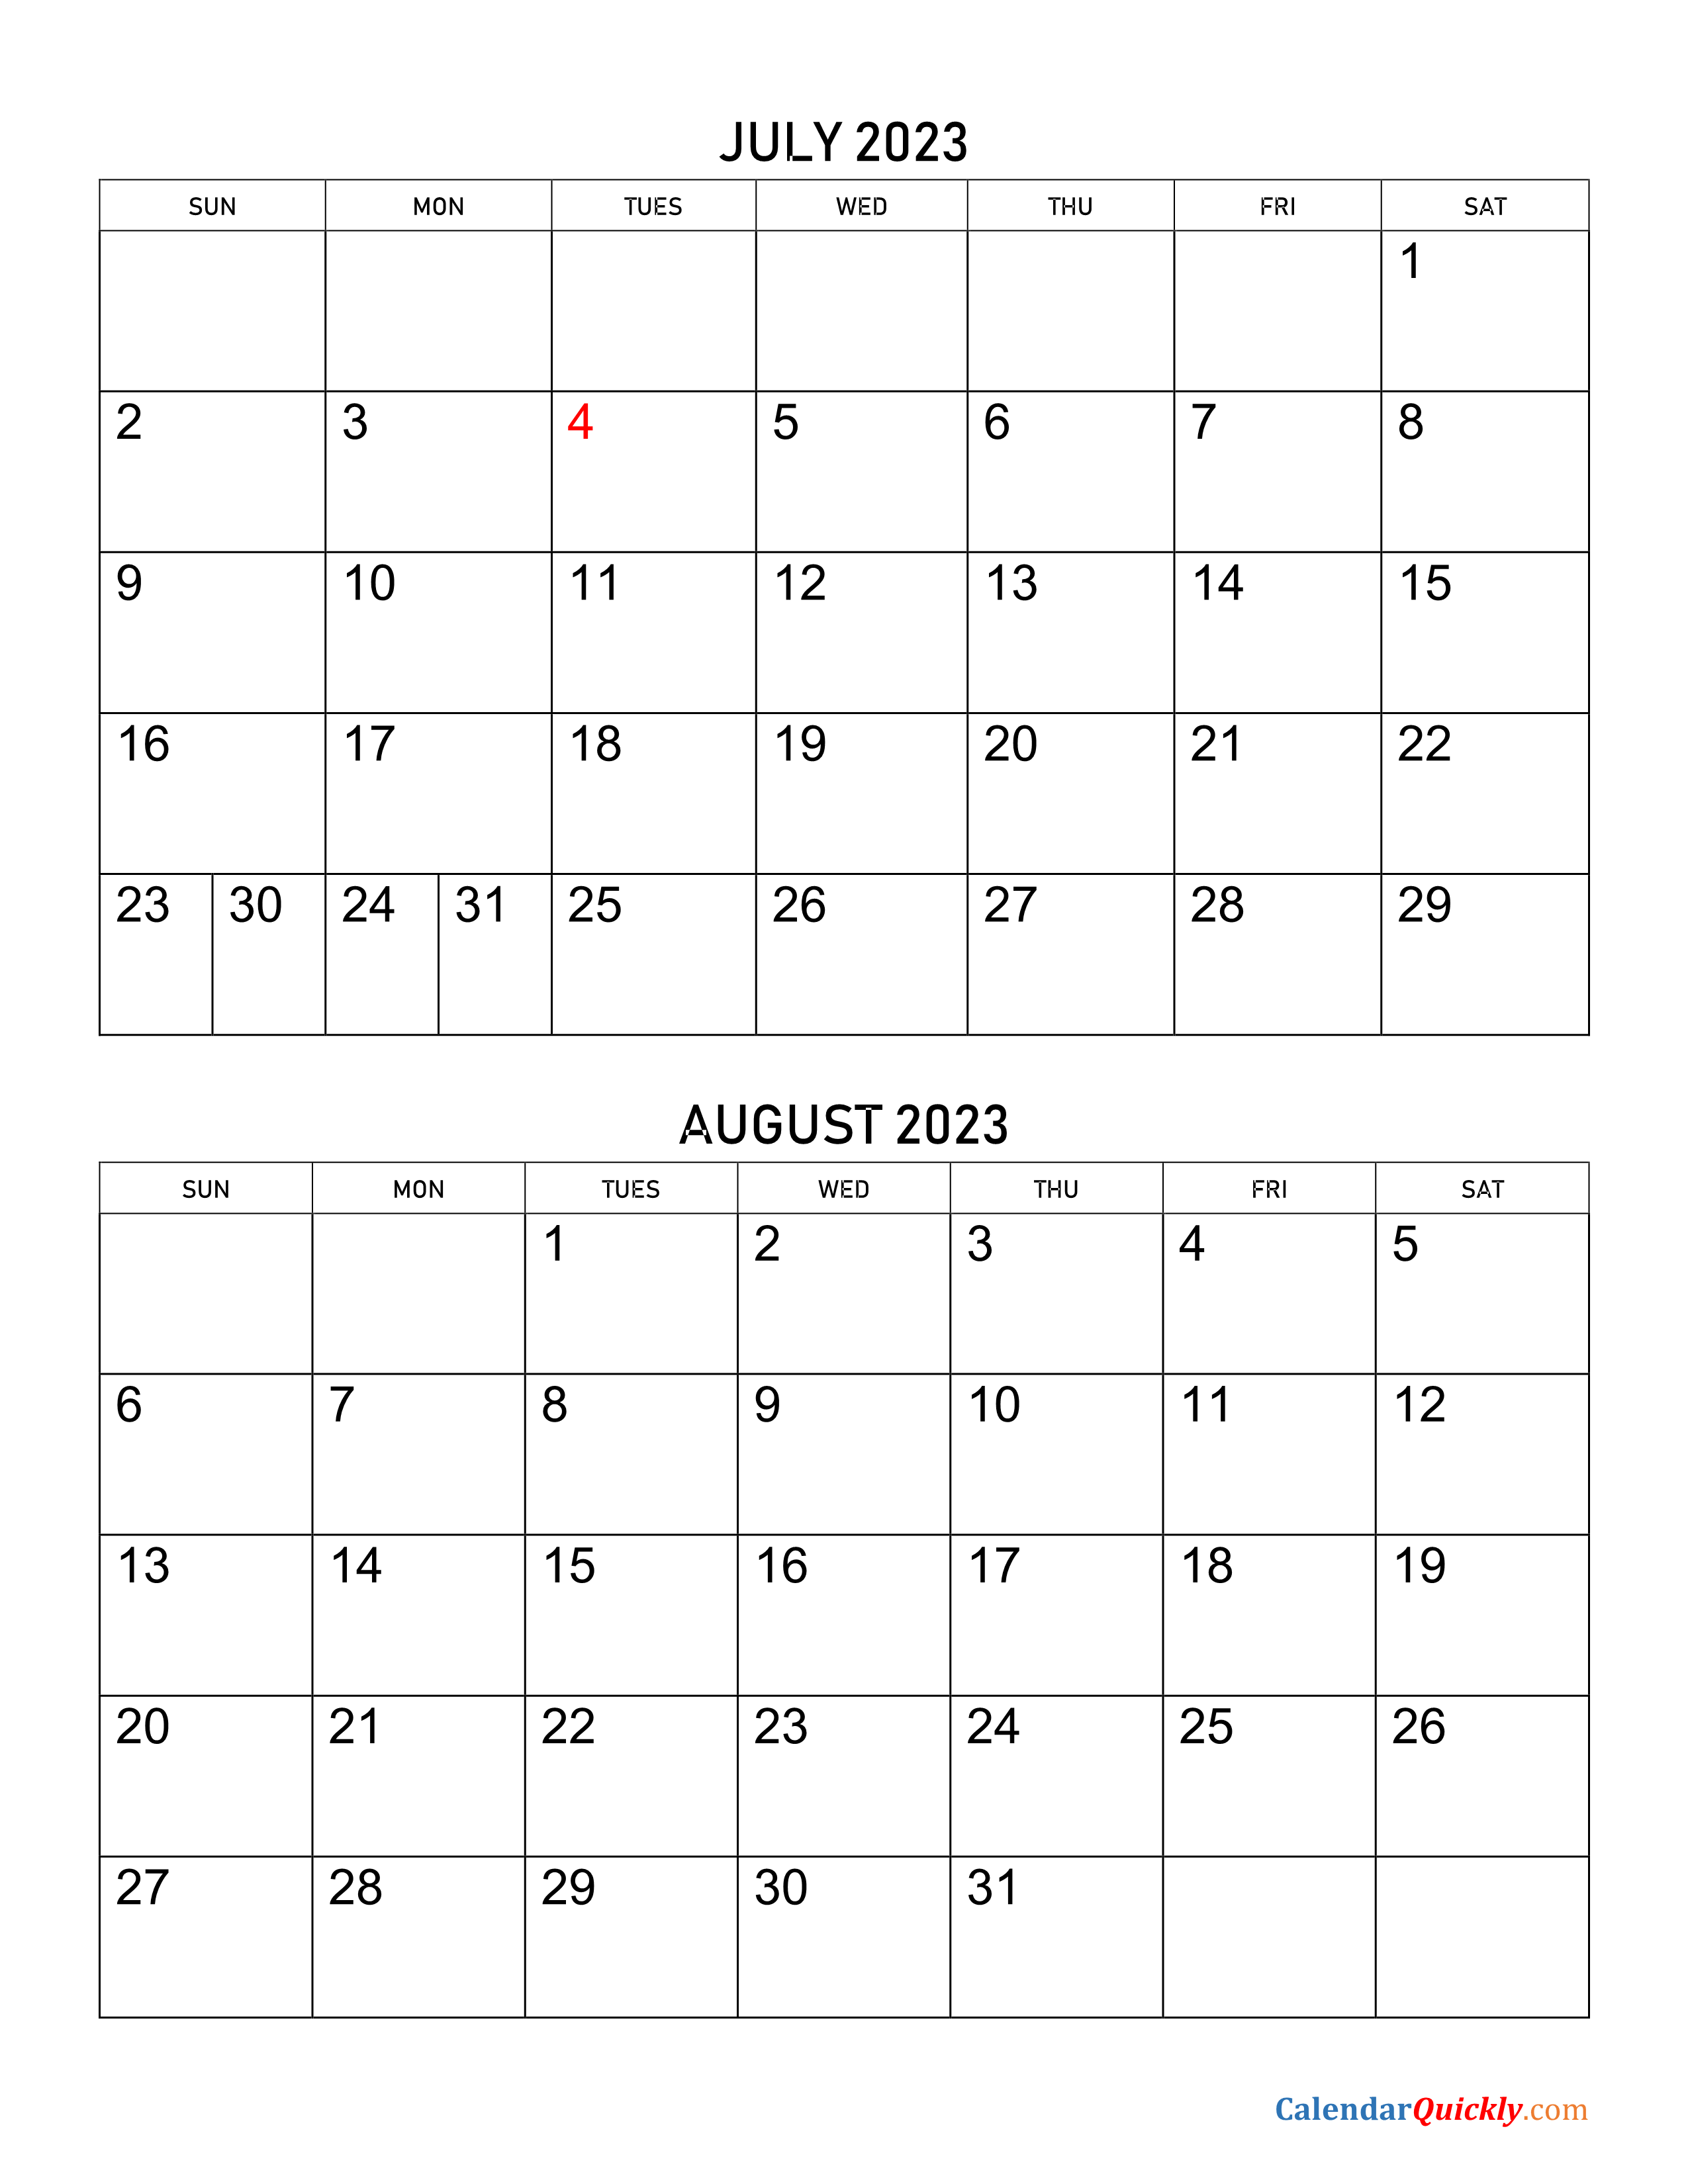 July and August 2023 Calendar | Calendar Quickly